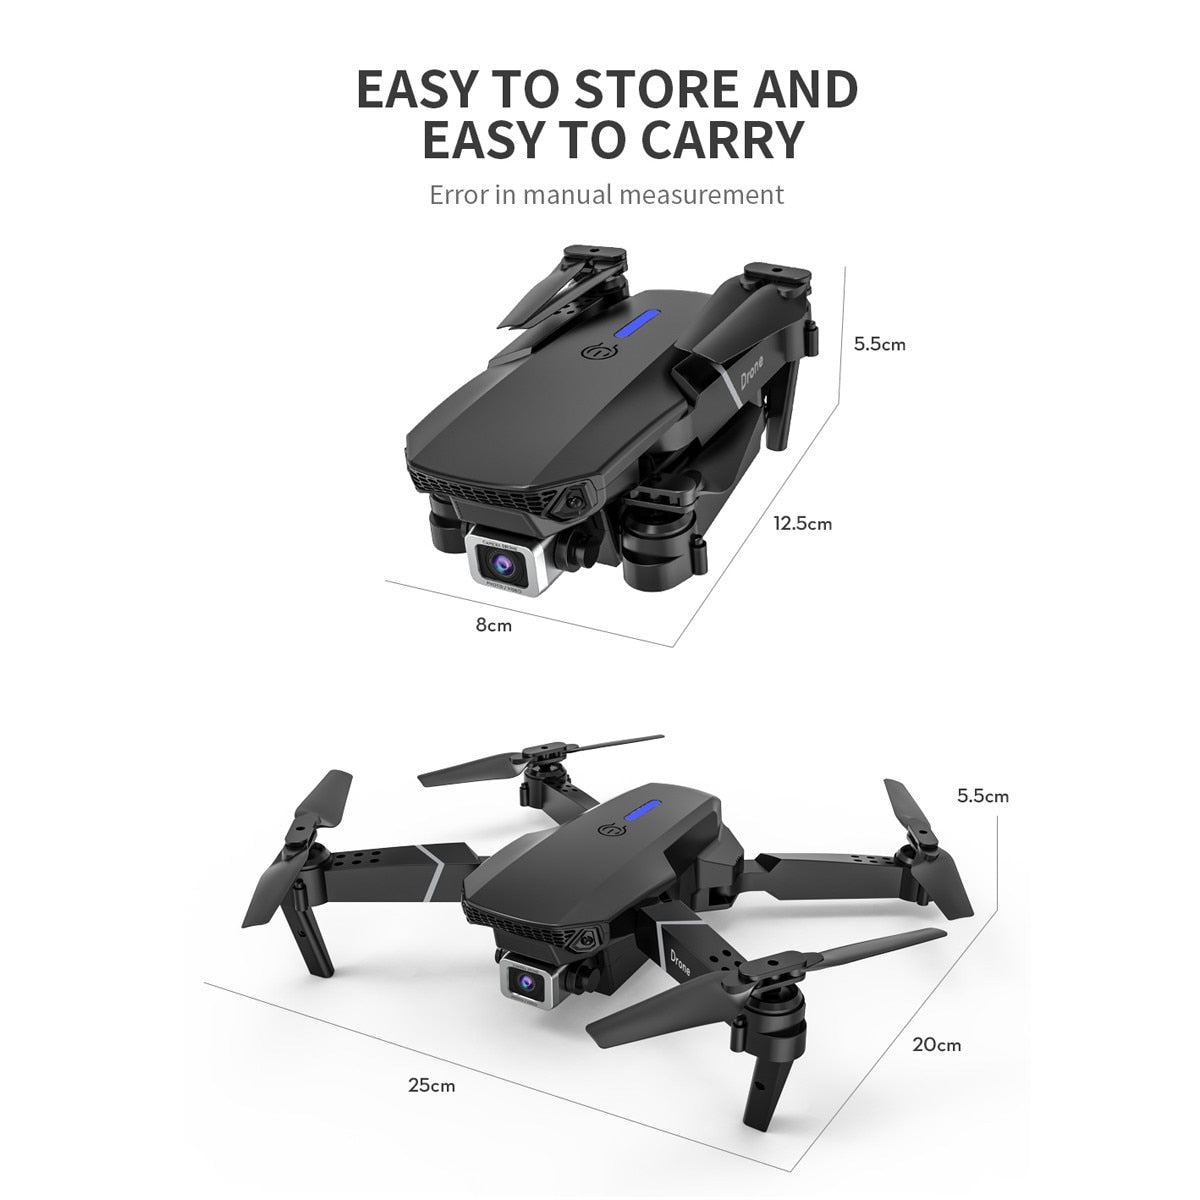 LSRC Quadcopter Drone E525 HD 4K 1080P Camera And WiFi FPV HeightKeeping RC Foldable Quadcopter Drone Toy Gift